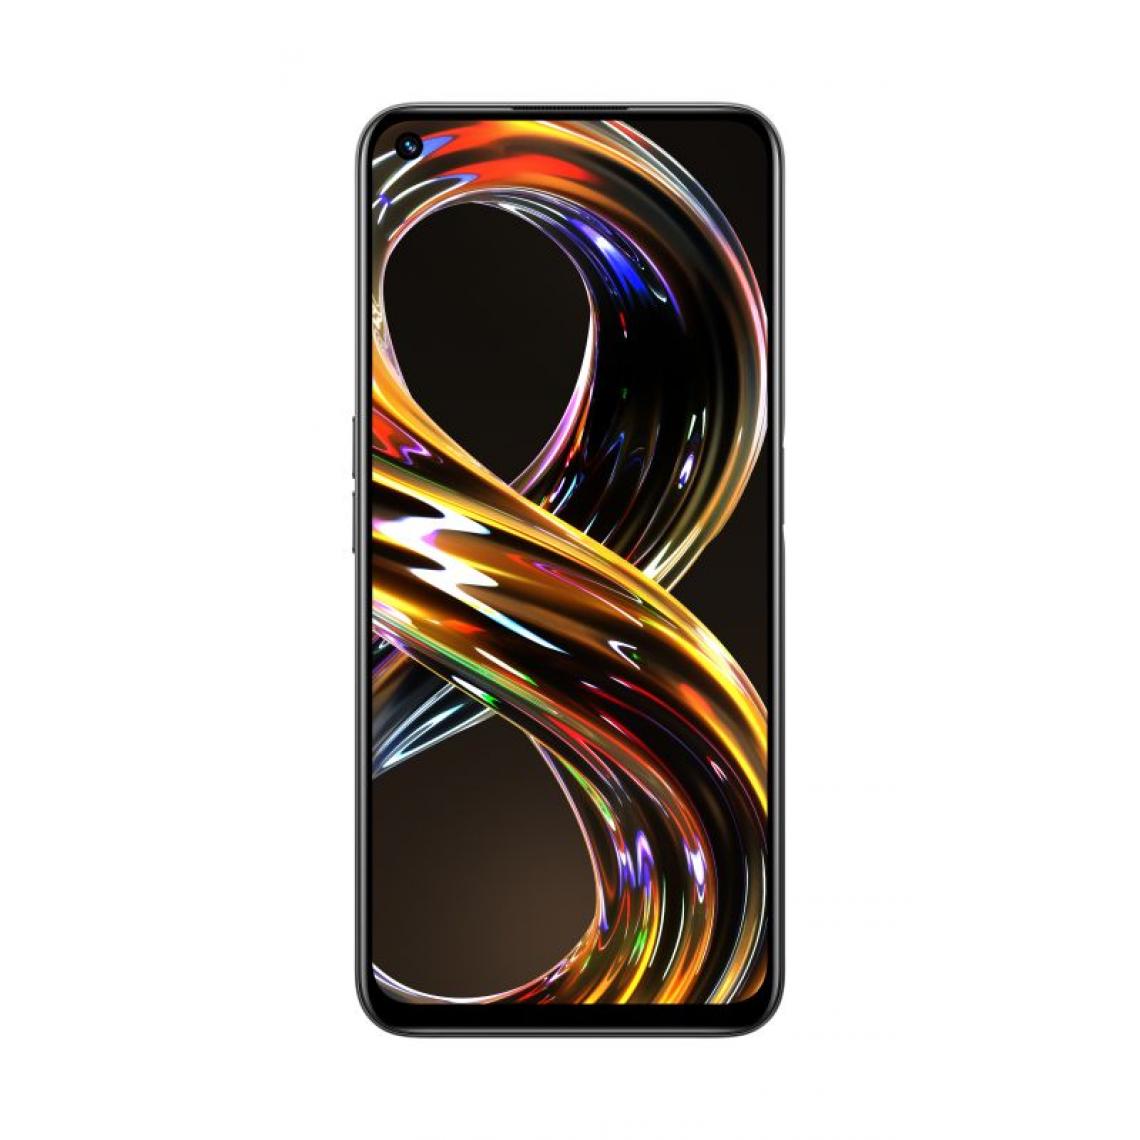 Inconnu - realme 8i 16,7 cm (6.59``) Double SIM Android 11 4G USB Type-C 4 Go 64 Go 5000 mAh Noir - Smartphone Android